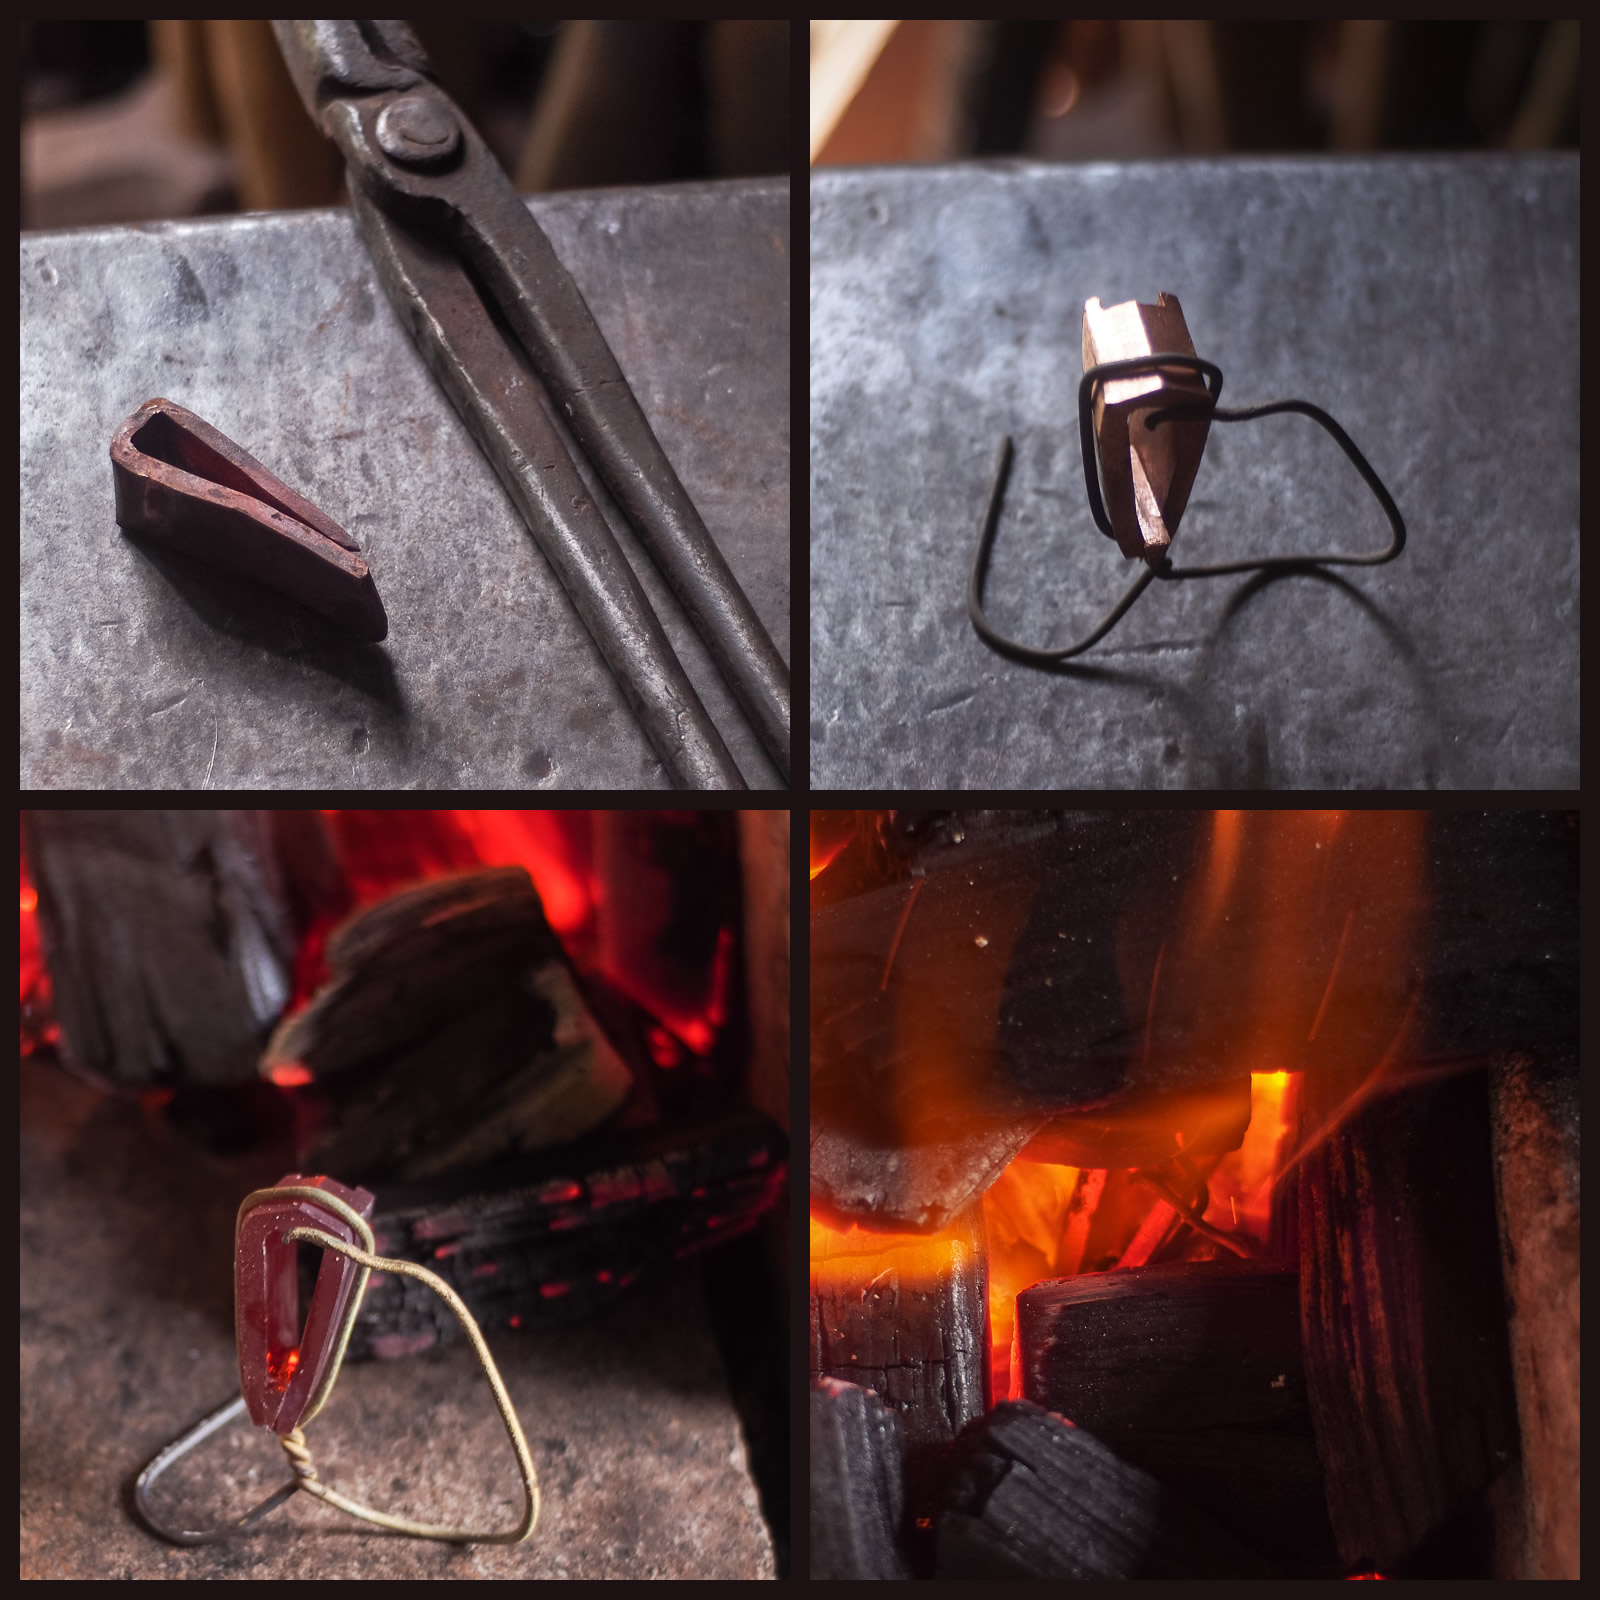 Island Blacksmith: Charcoal forged nihonto made from reclaimed and natural materials using traditional techniques